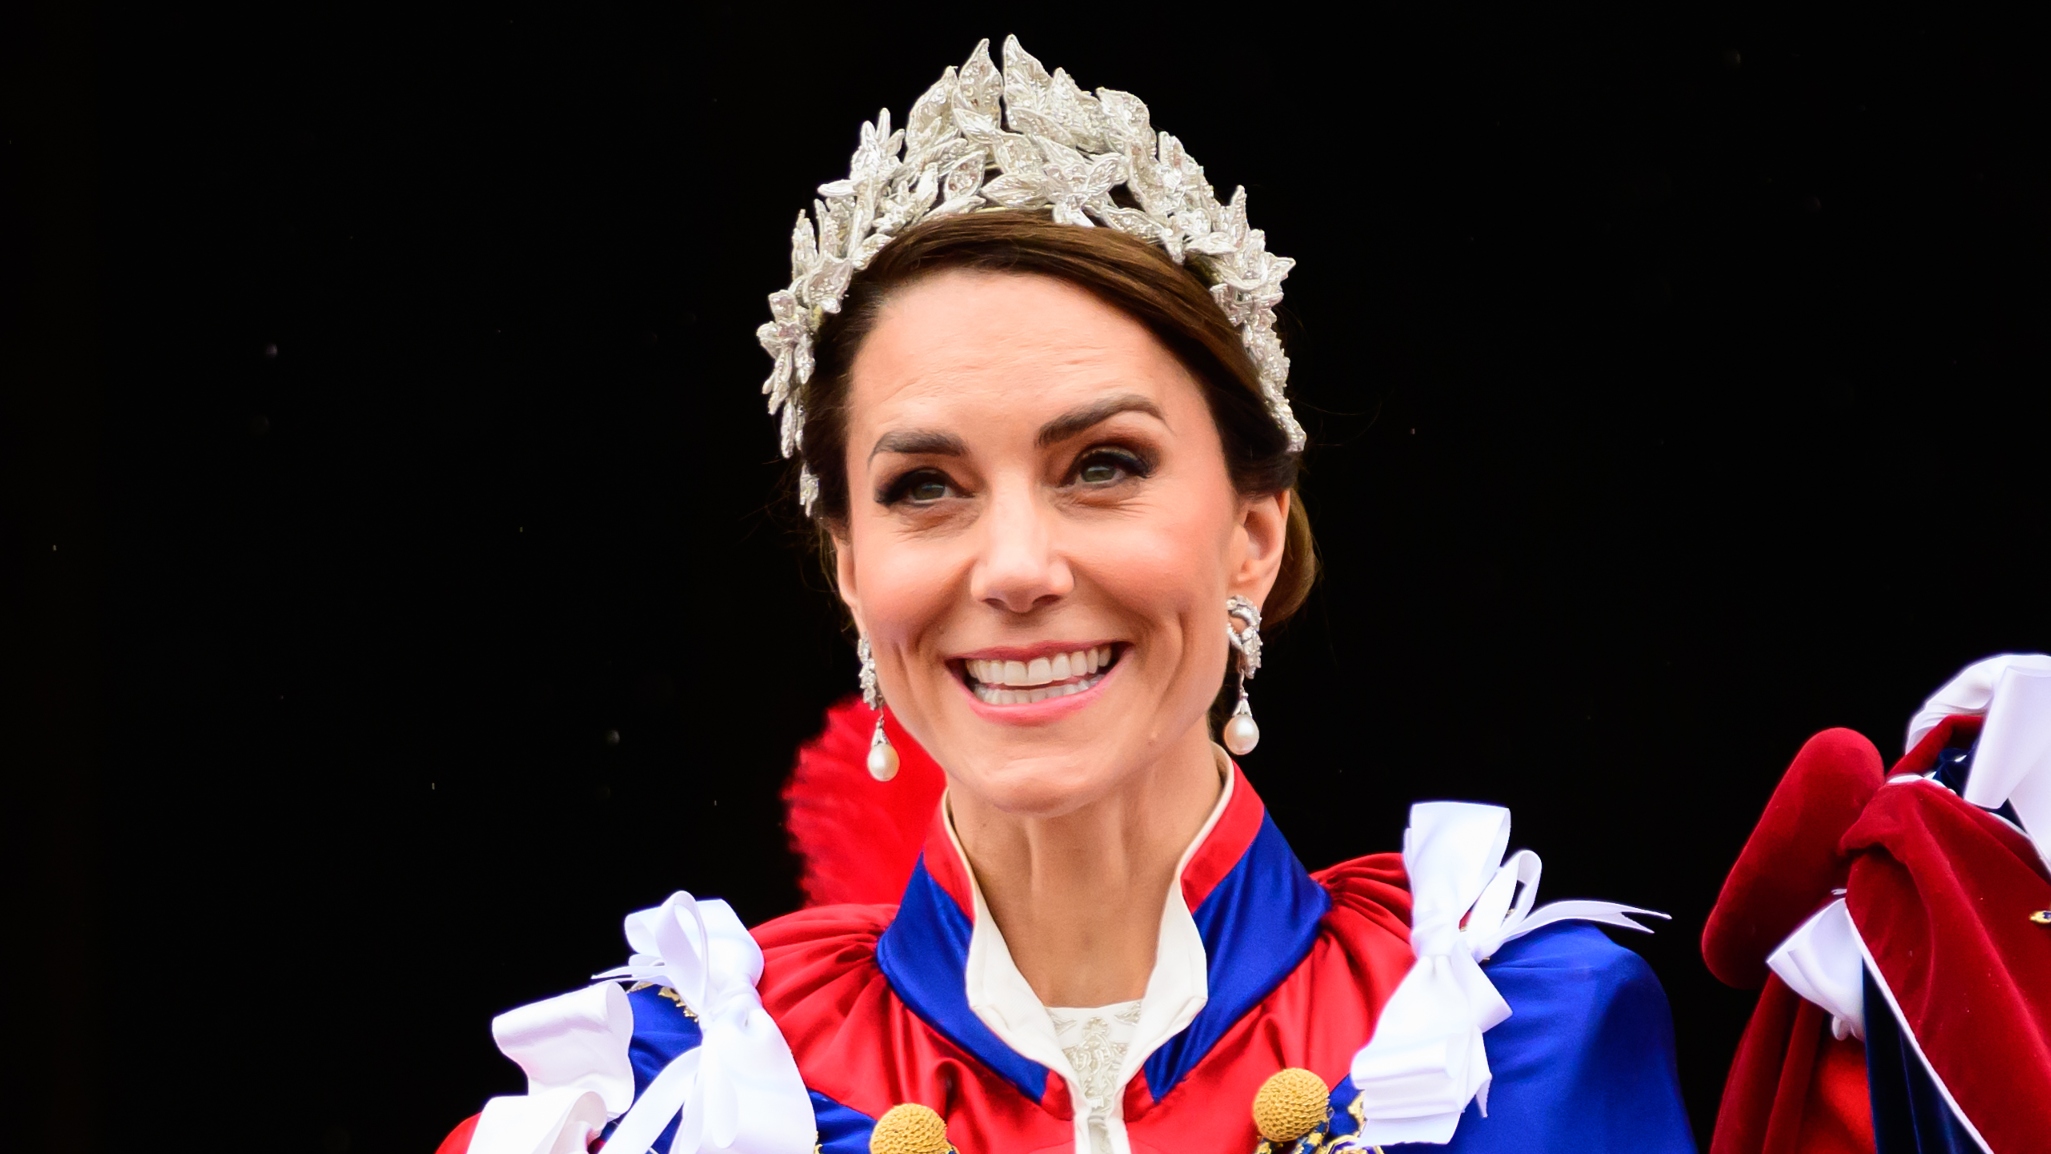 Kate Middleton’s coronation headpiece pays respect to King Charles ...